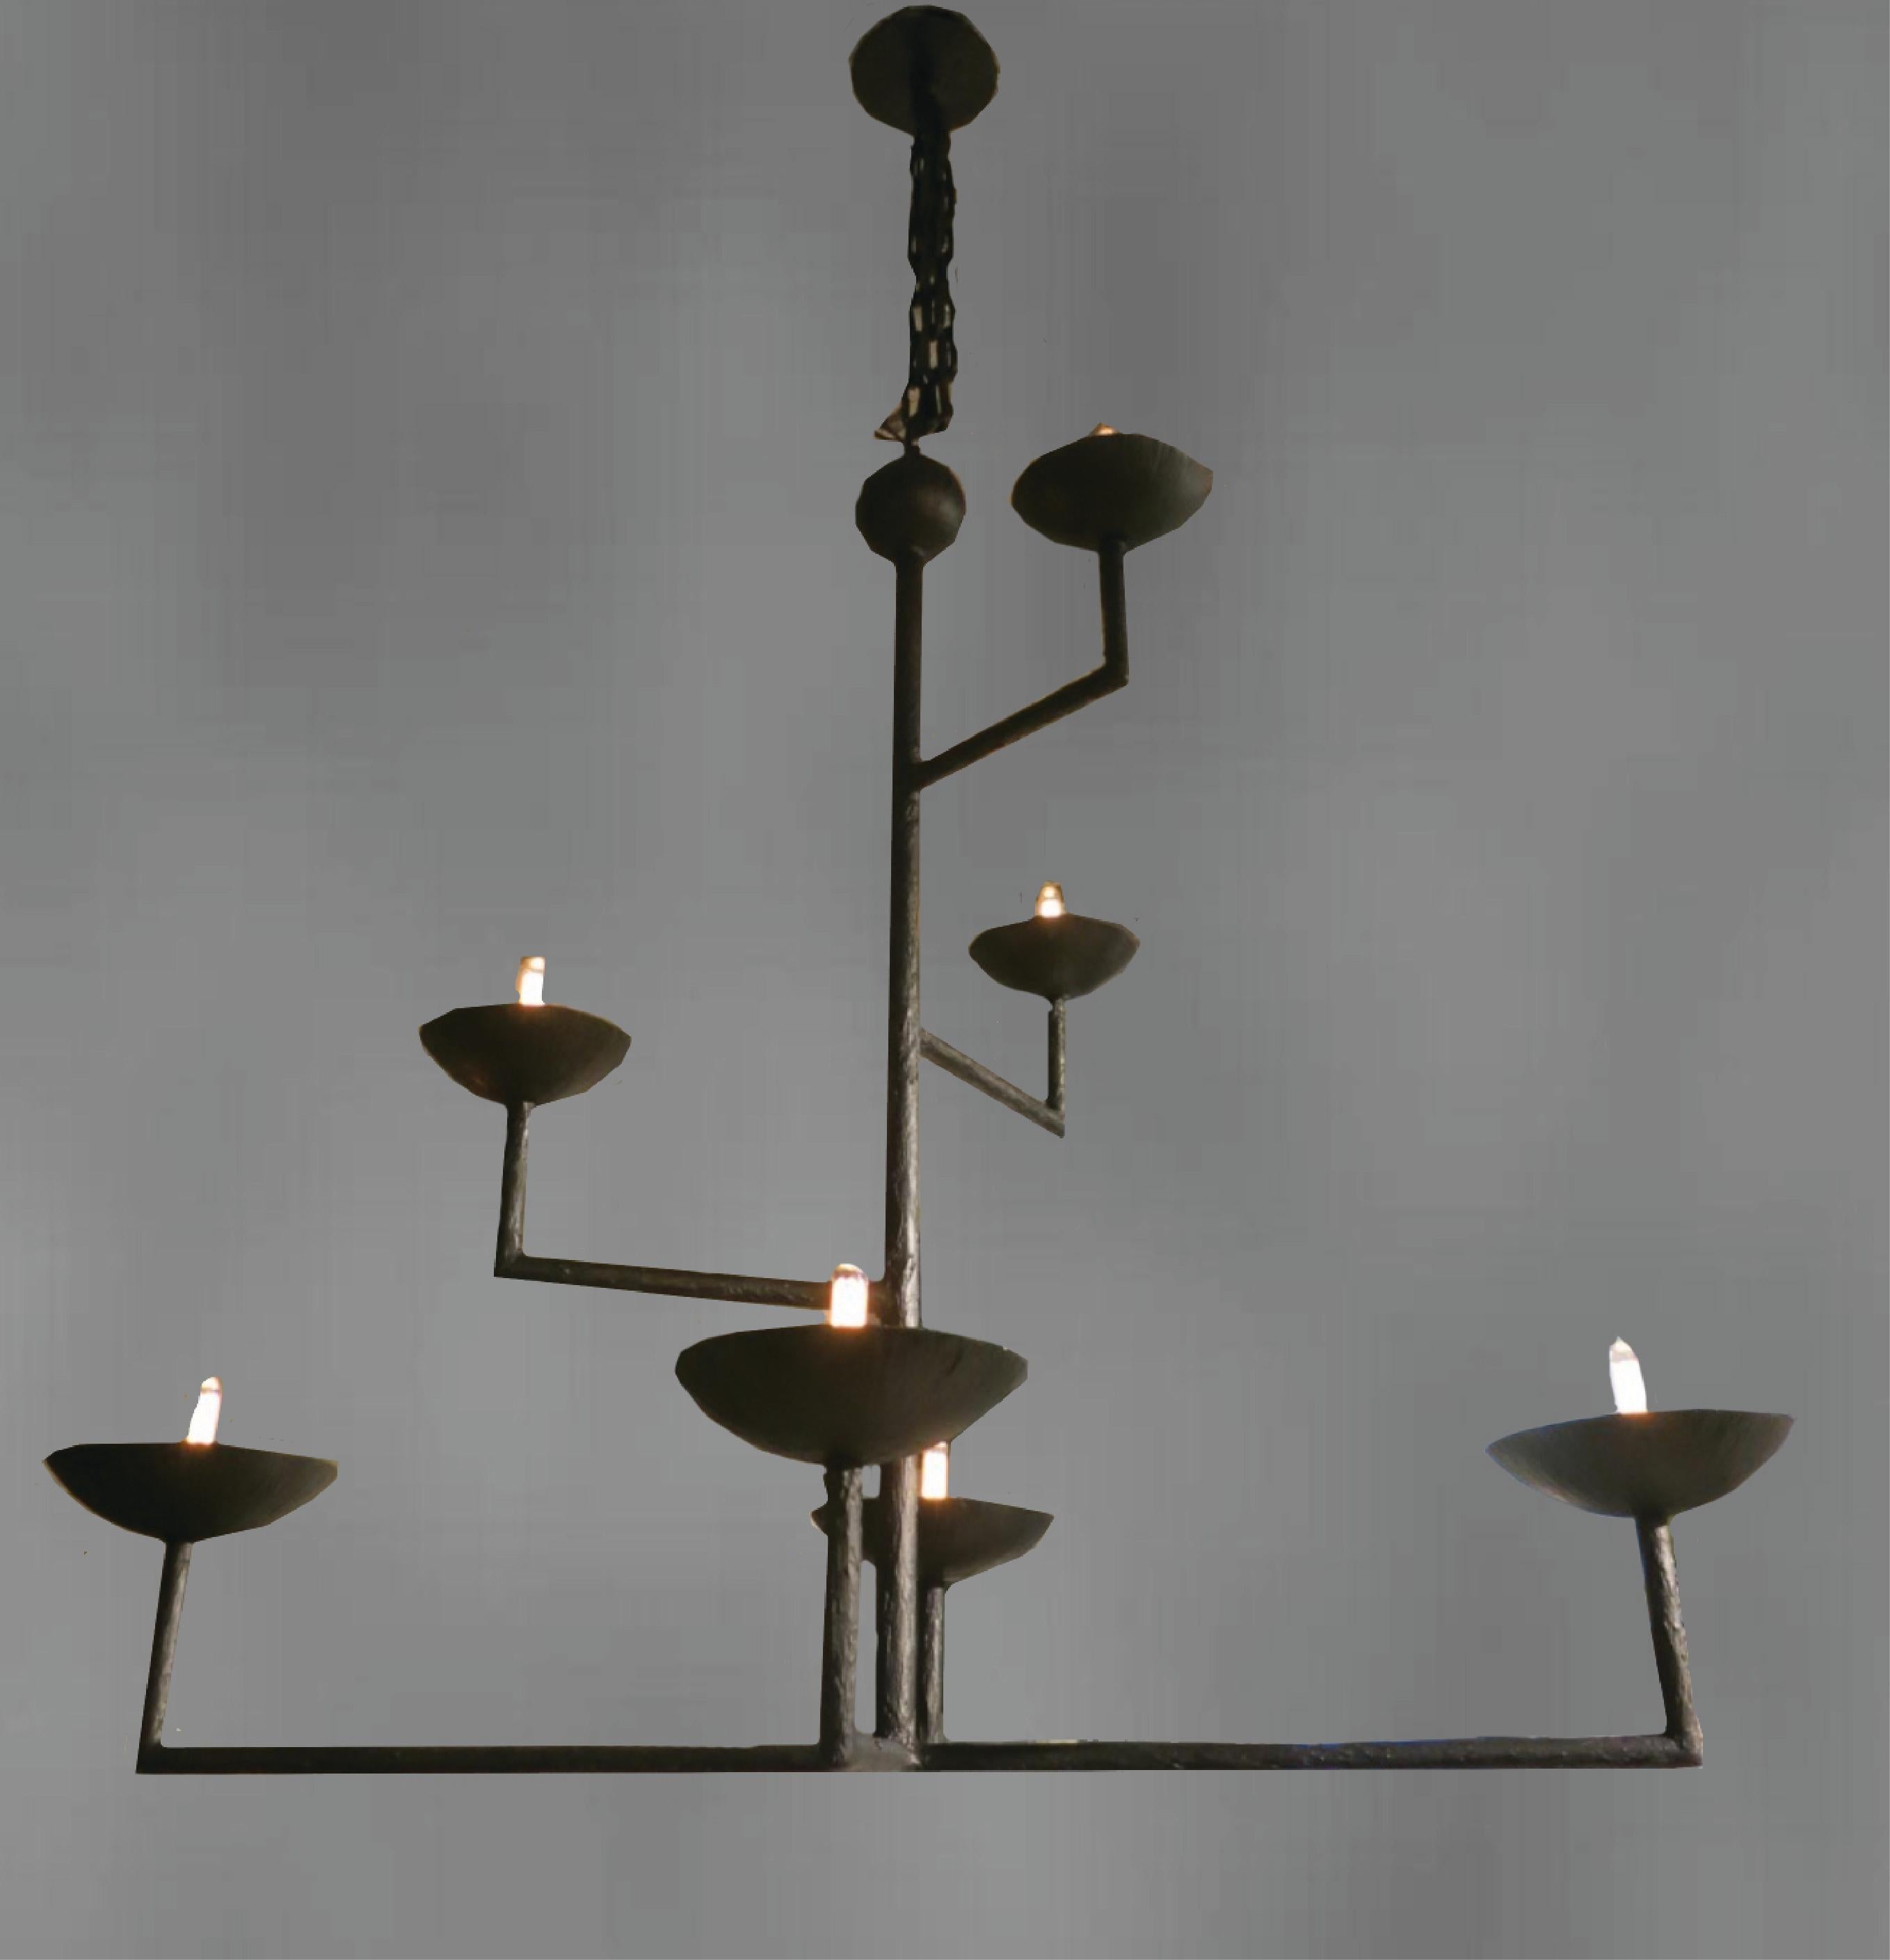 Contemporary 7 Cup Plaster Chandelier in a Bronze Finish with Full Ball and Chain For Sale